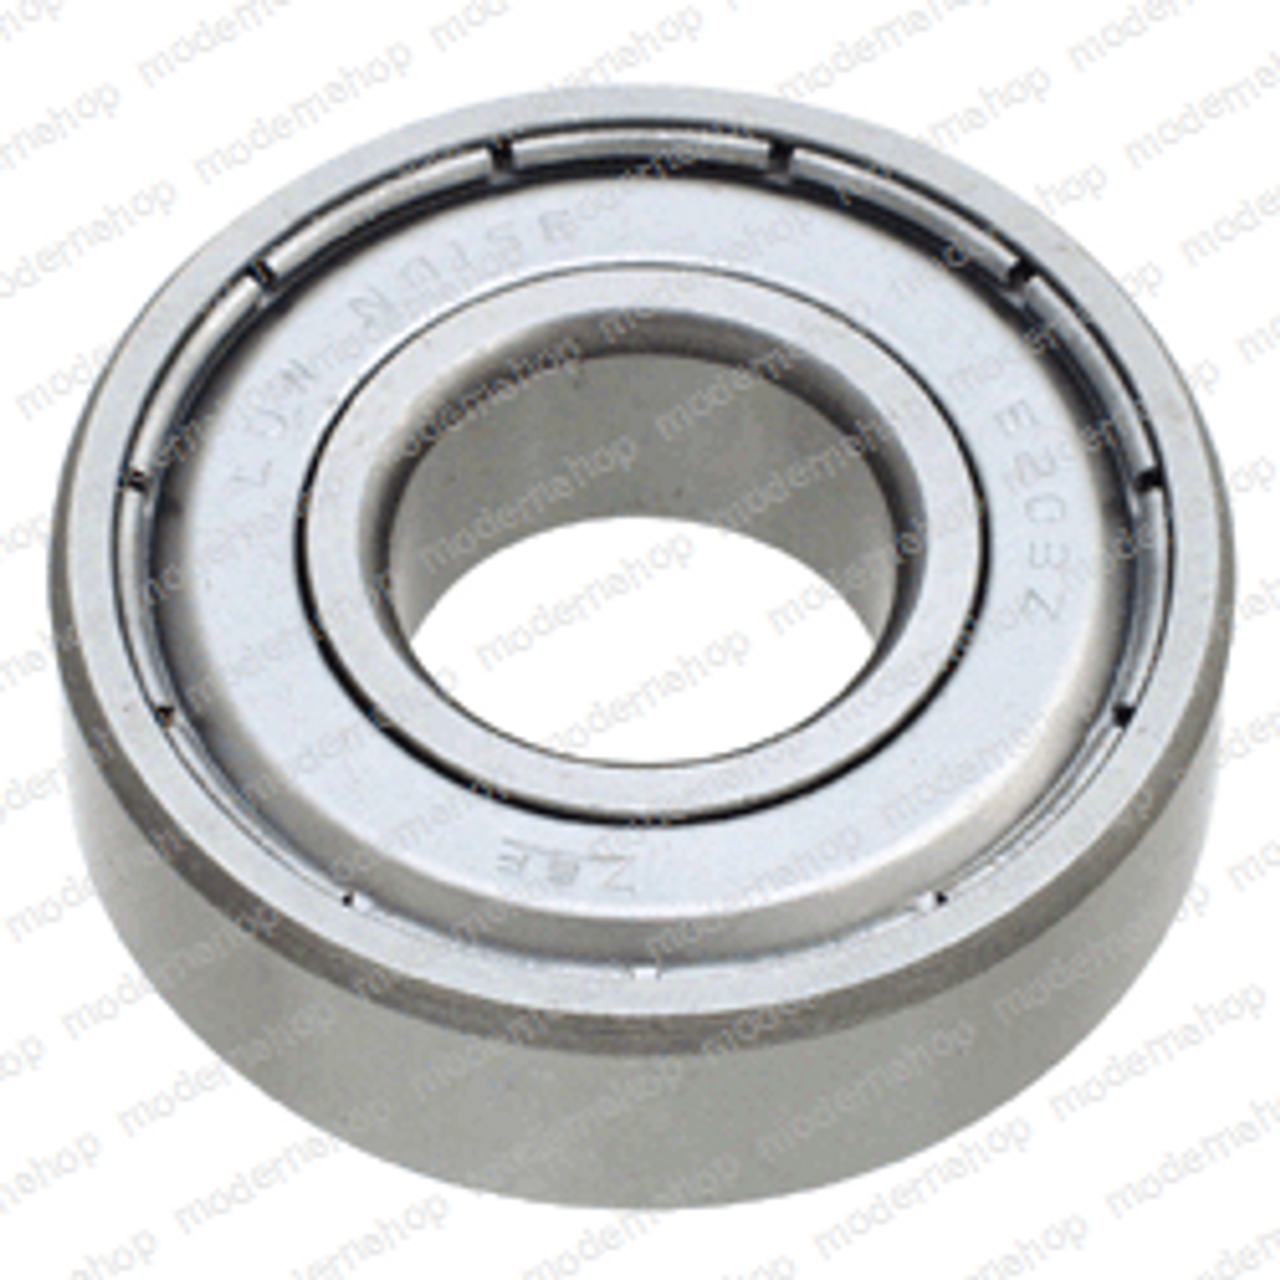 8552: Crown Forklift BEARING - BALL DOUBLE SHIELD